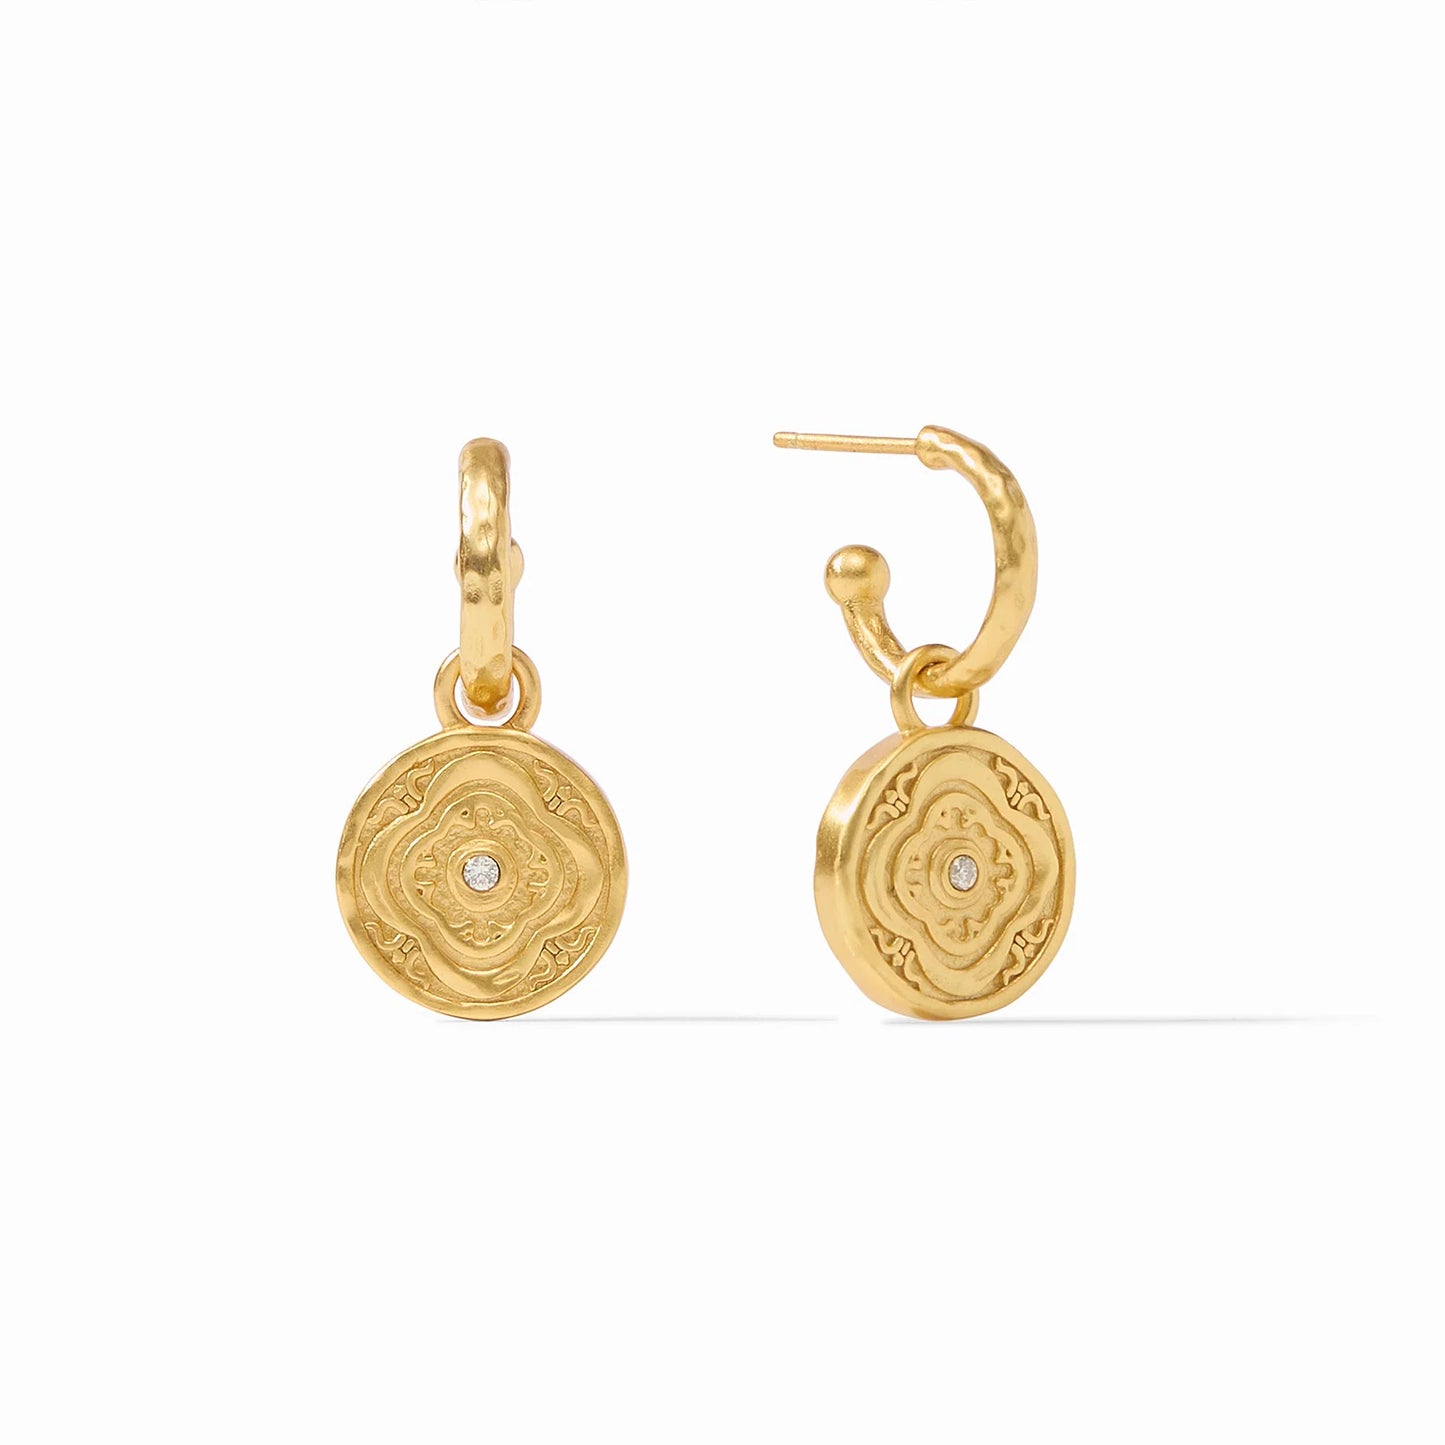 Astor 6-in-1 Charm Earring - Iridescent Raspberry by Julie Vos. This earring can be worn 6 different ways, incl flip elements. 24K gold plate, imported glass, CZ, 1.4" in length. Shop at The Painted Cottage in Edgewater, MD.